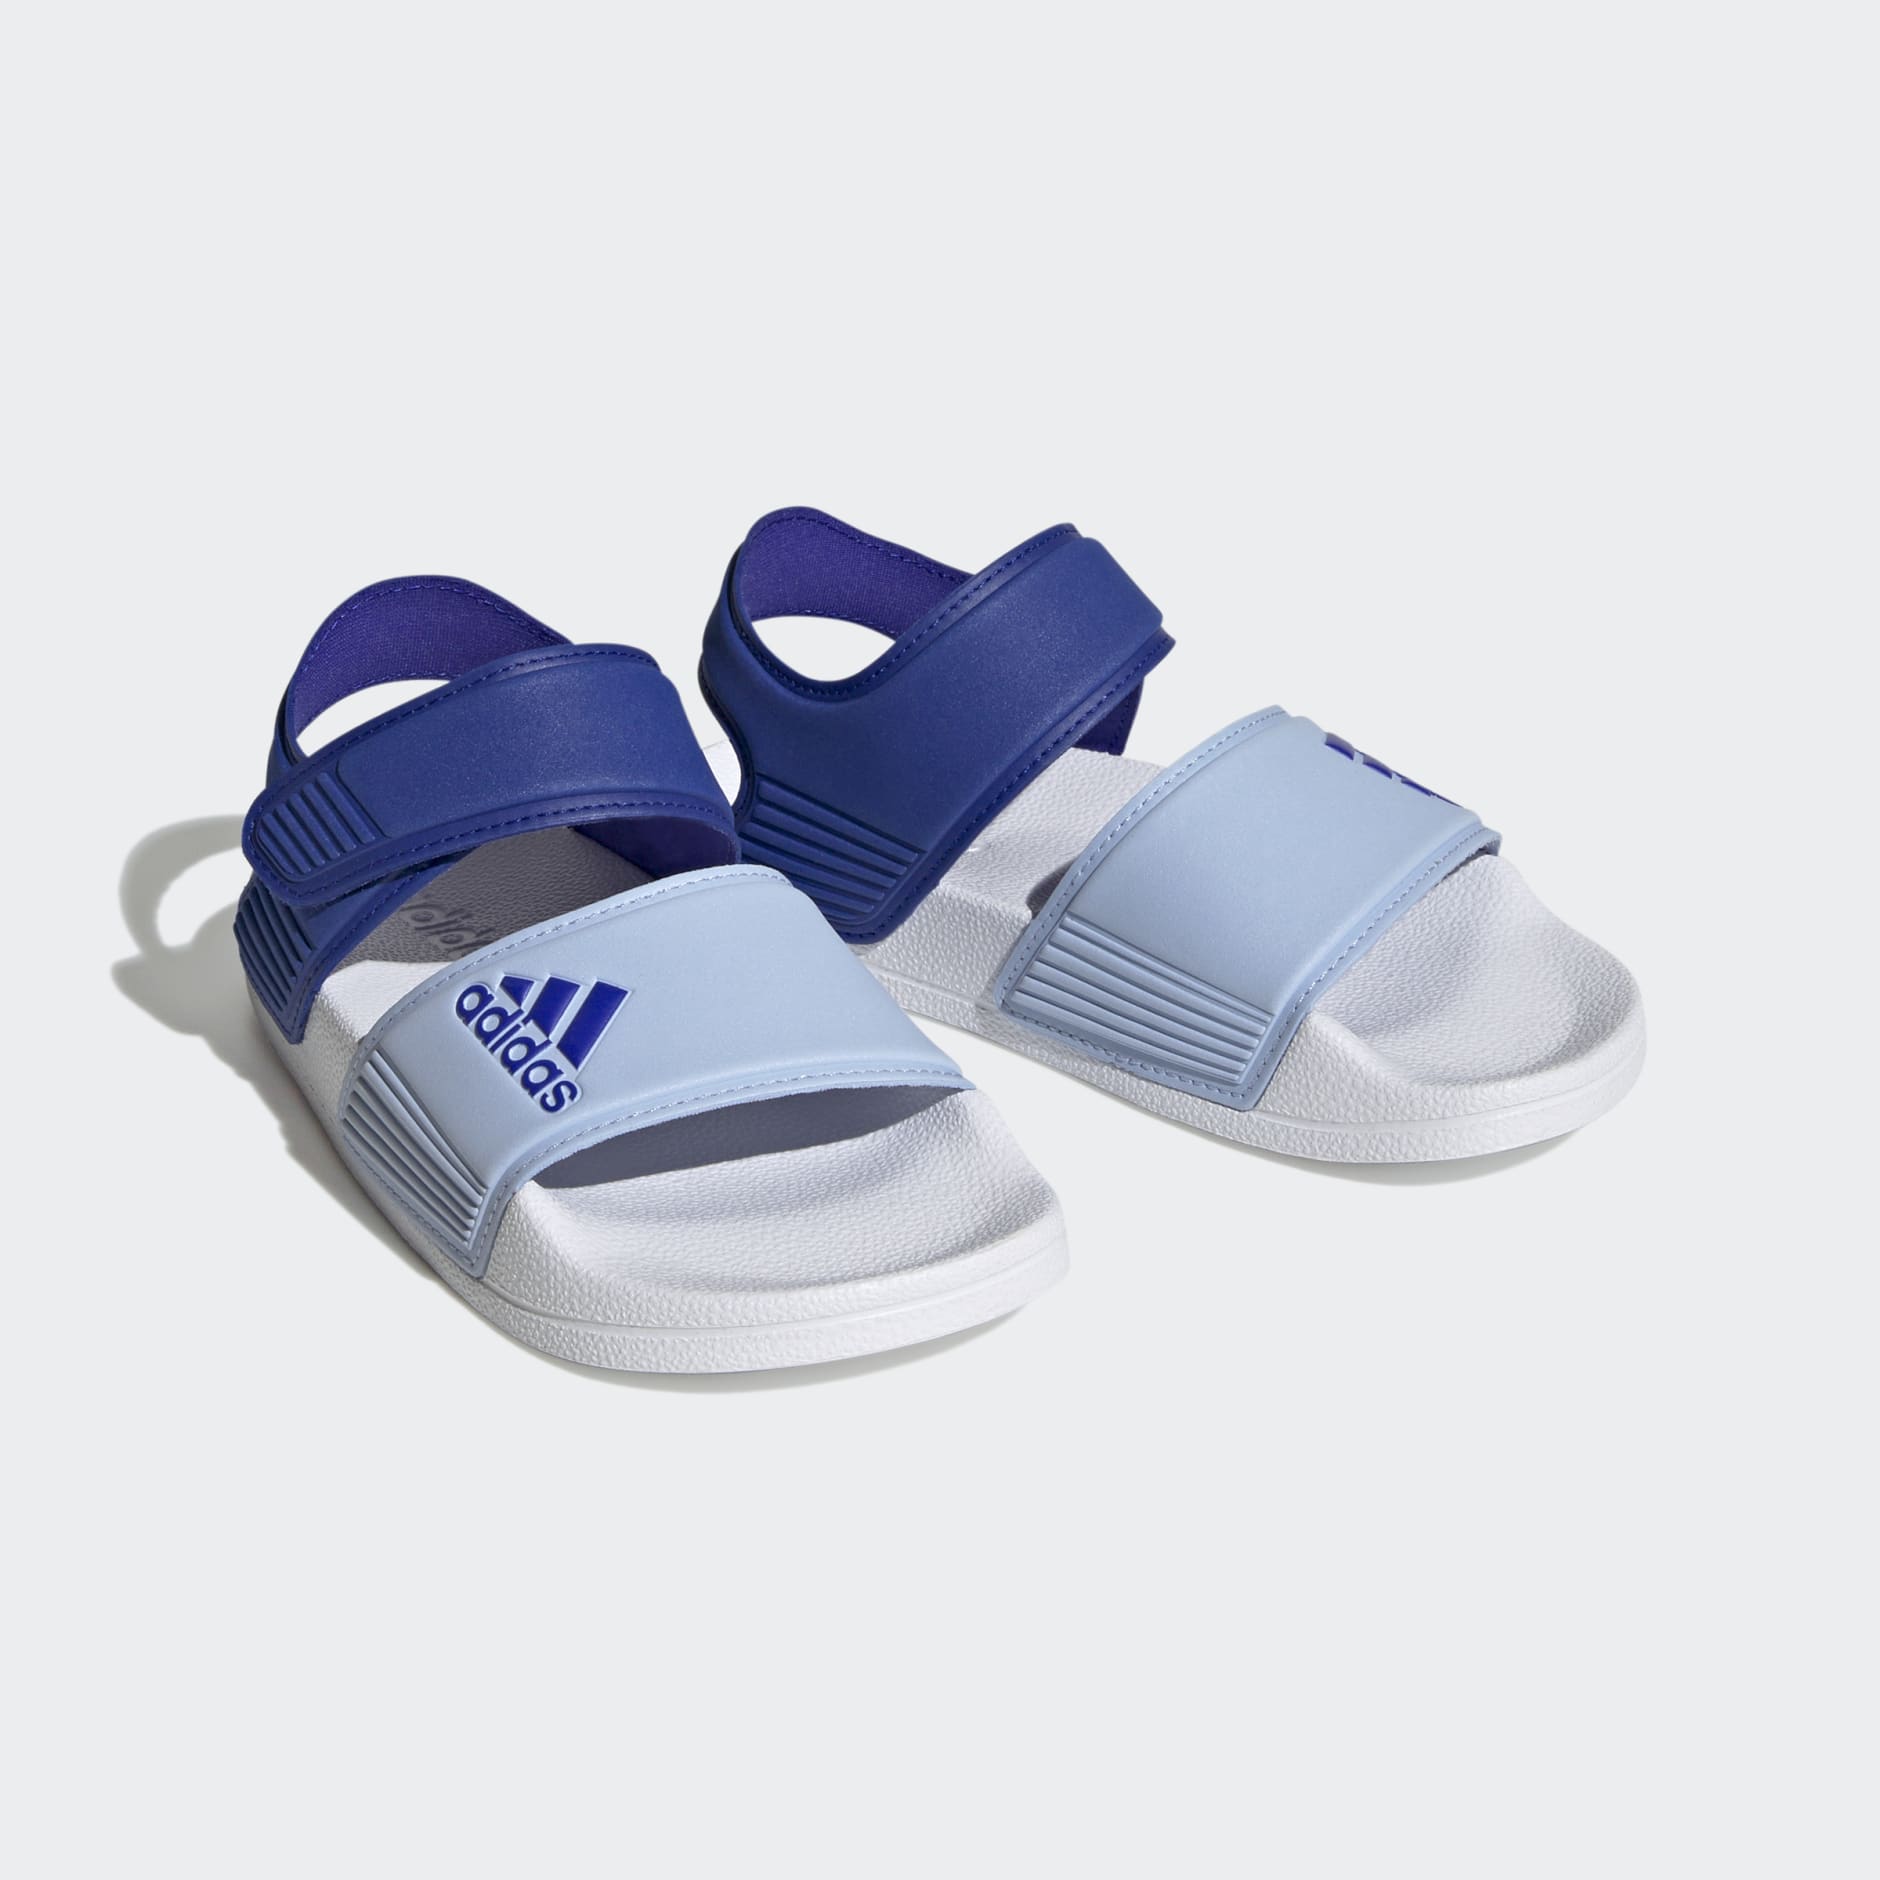 Shoes - Adilette Sandals - Blue | adidas South Africa